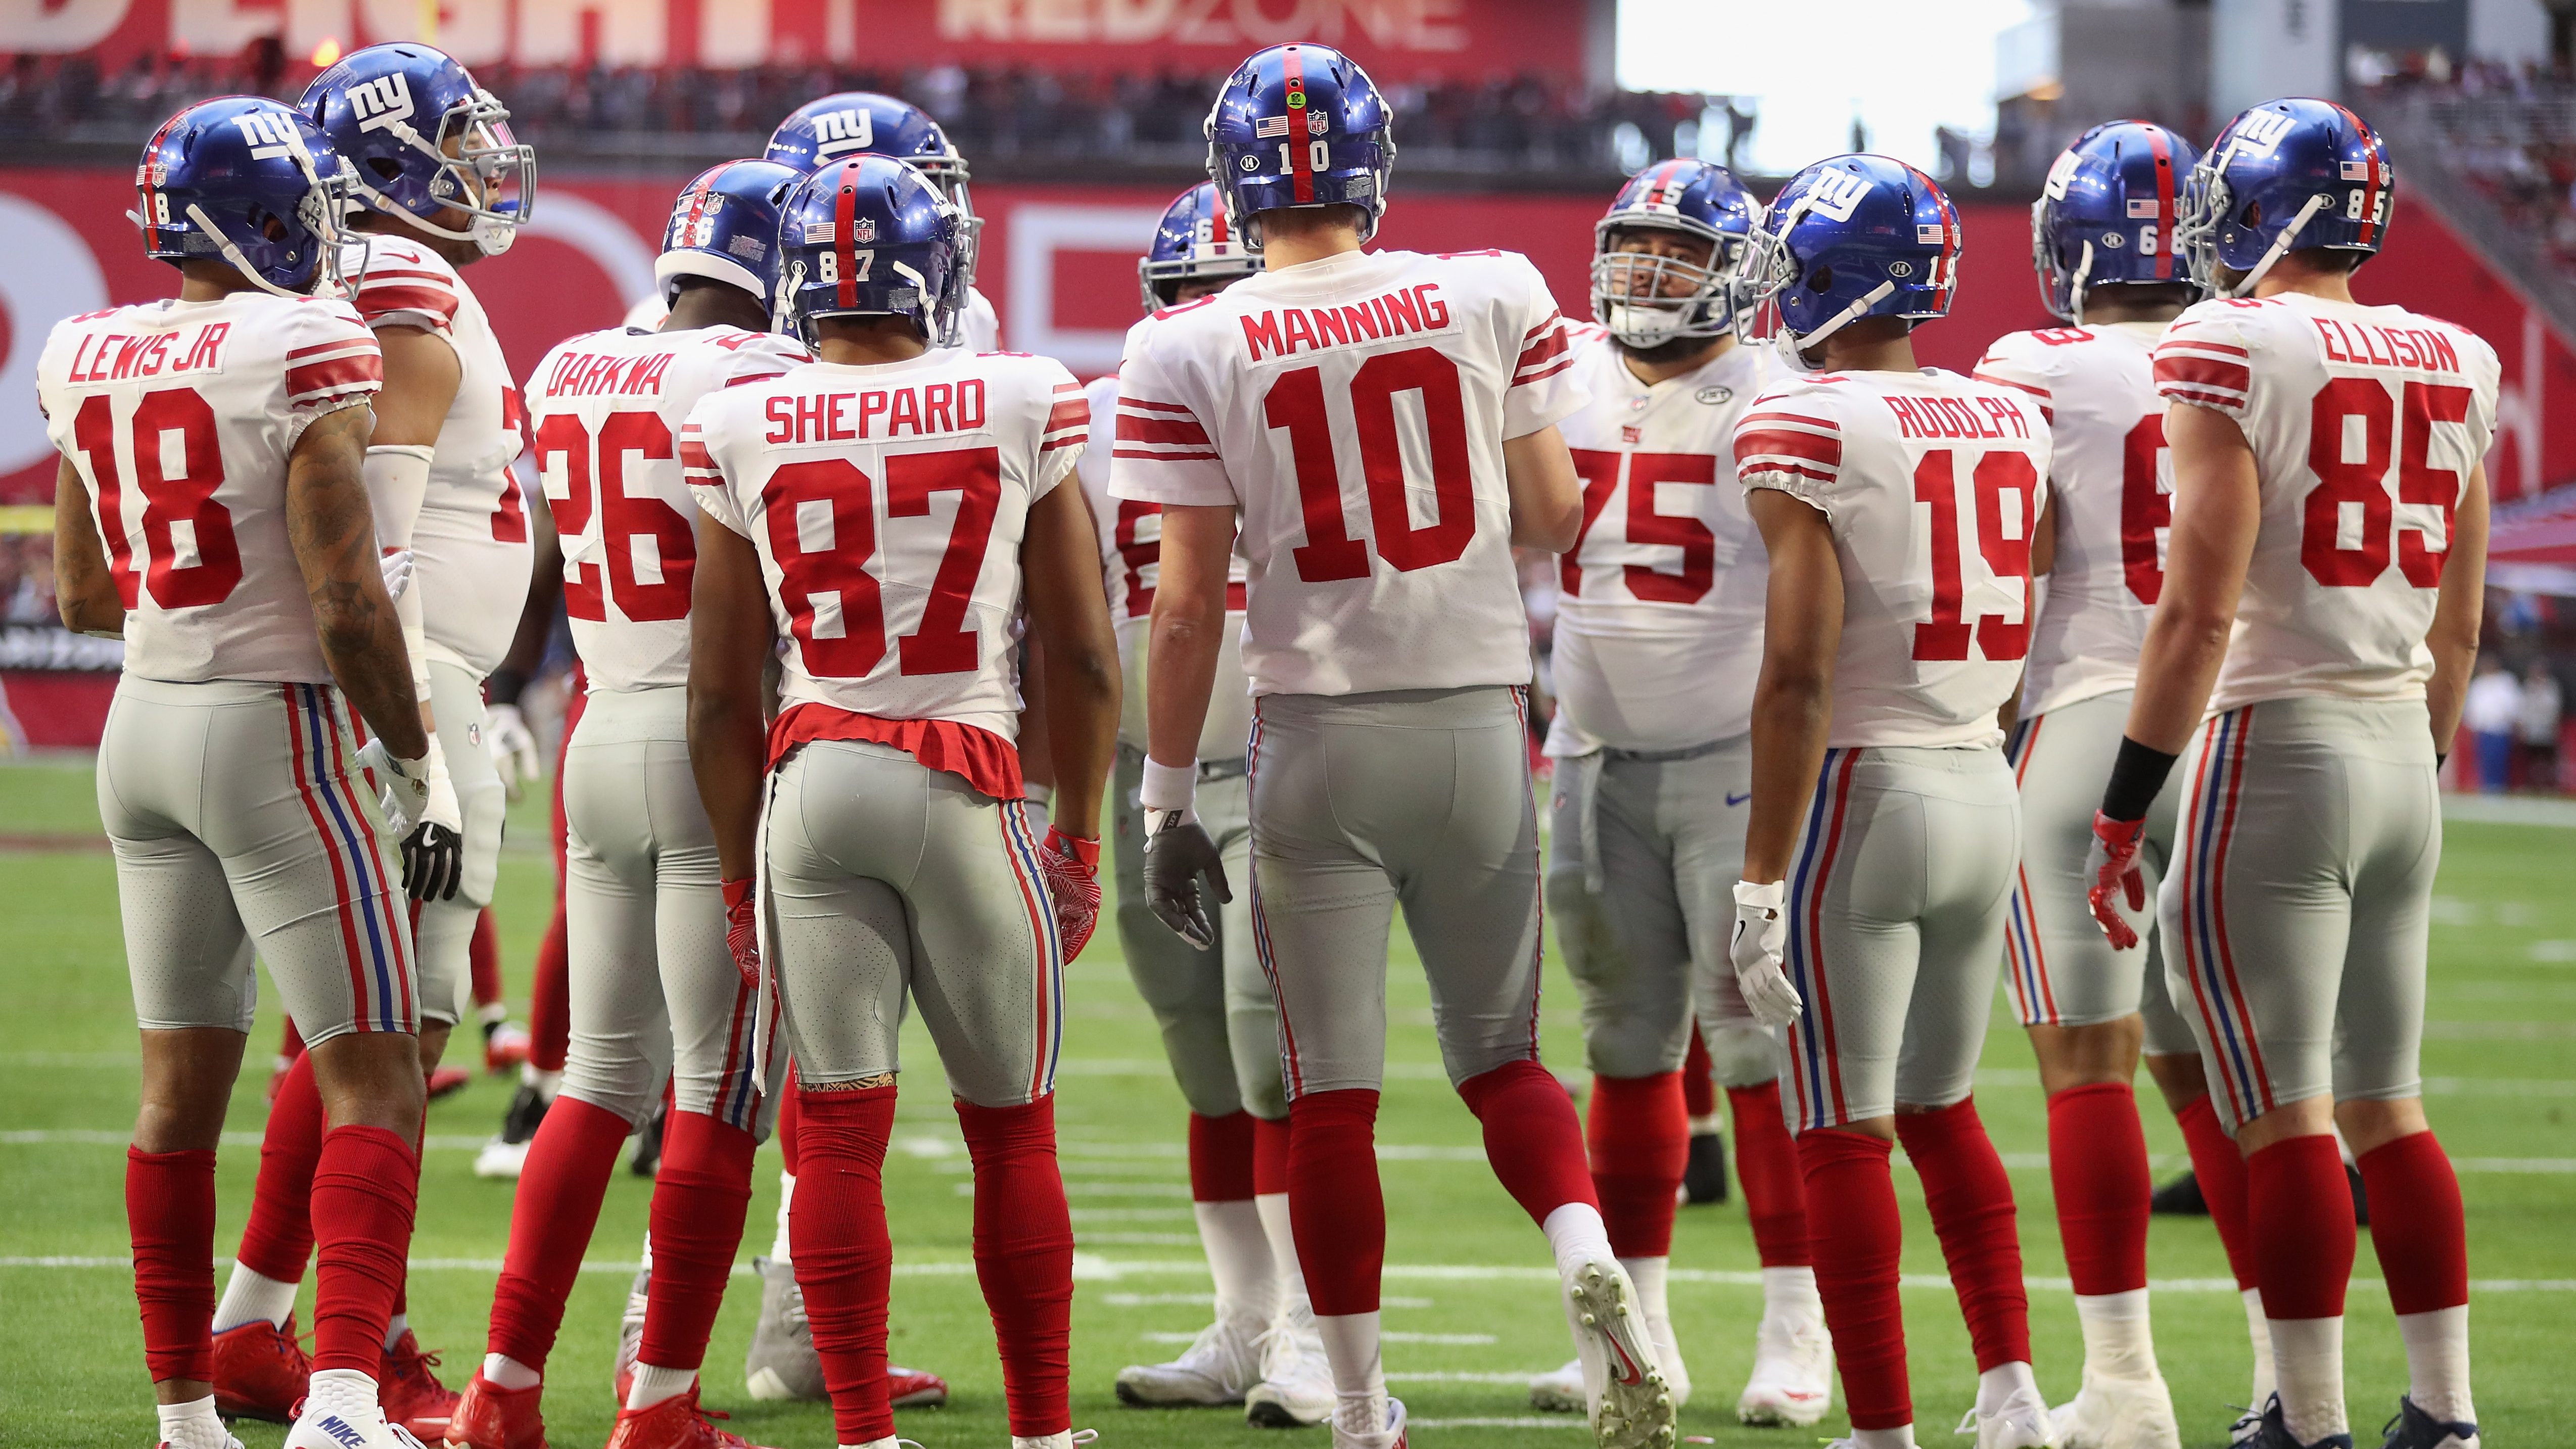 Giants NFL Draft Picks 2019 When Does New York Select on Day 3?